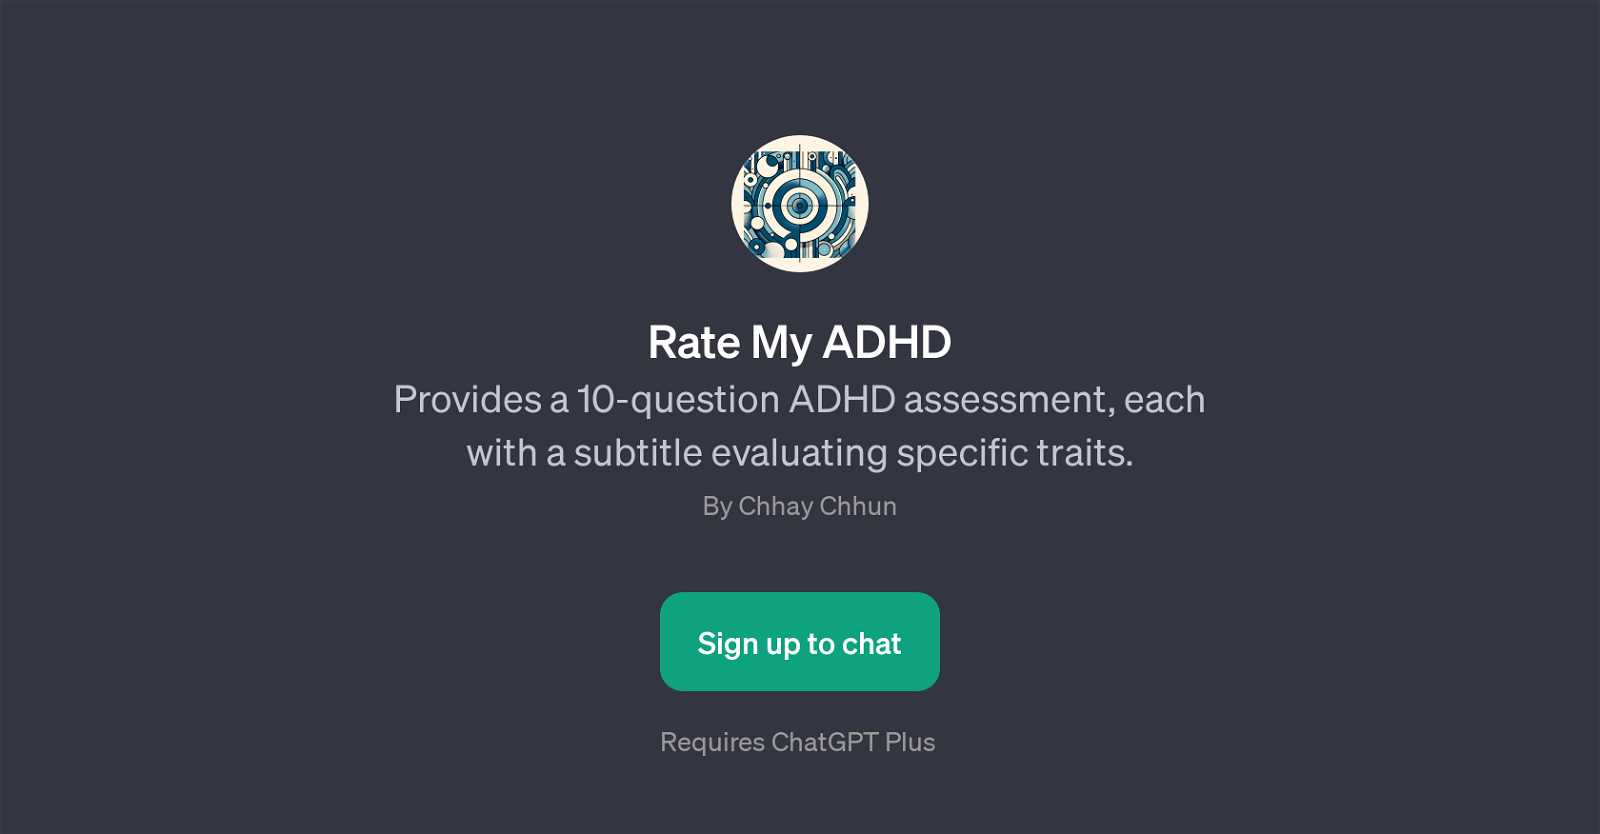 Rate My ADHD website